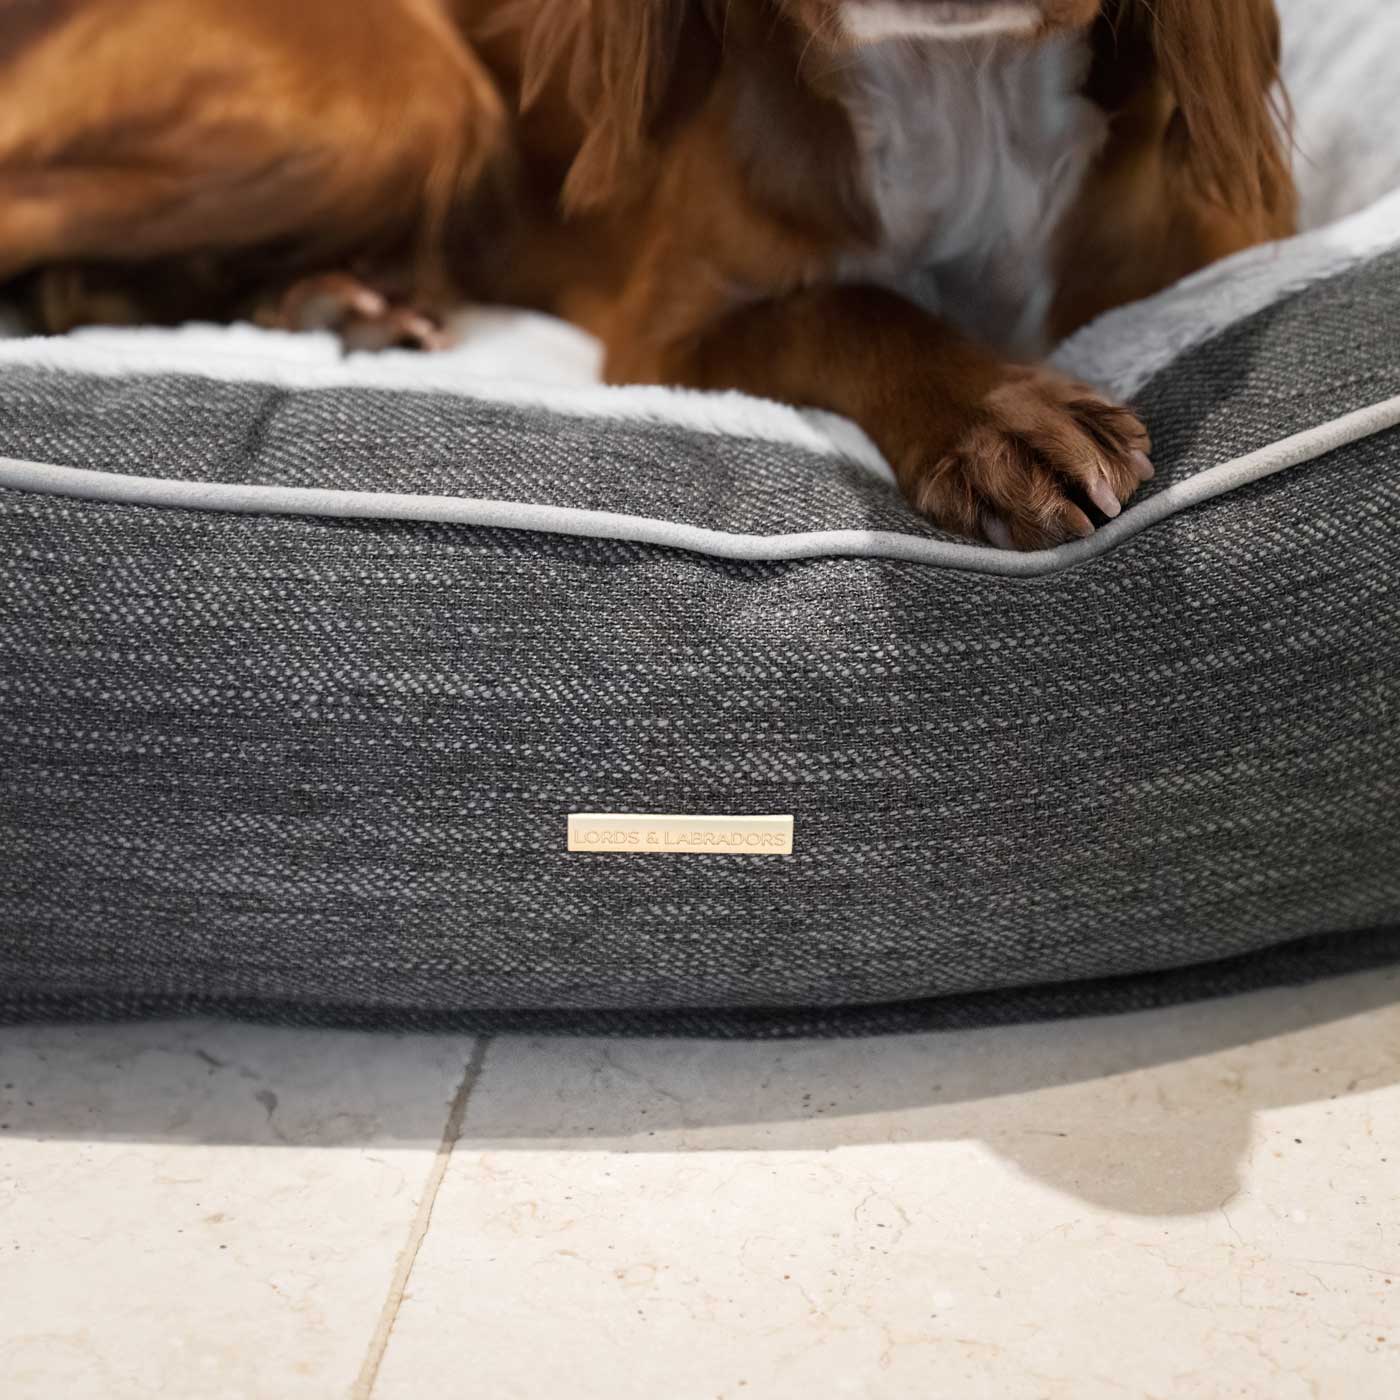 Discover Our Luxurious “The Nest” Dog Bed, Crafted Using Soft, Plush Fabric For Extra Comfort! Bringing Your Canine Companion The Perfect Bed For Dogs To Curl Up To! Available Now at Lords & Labradors US